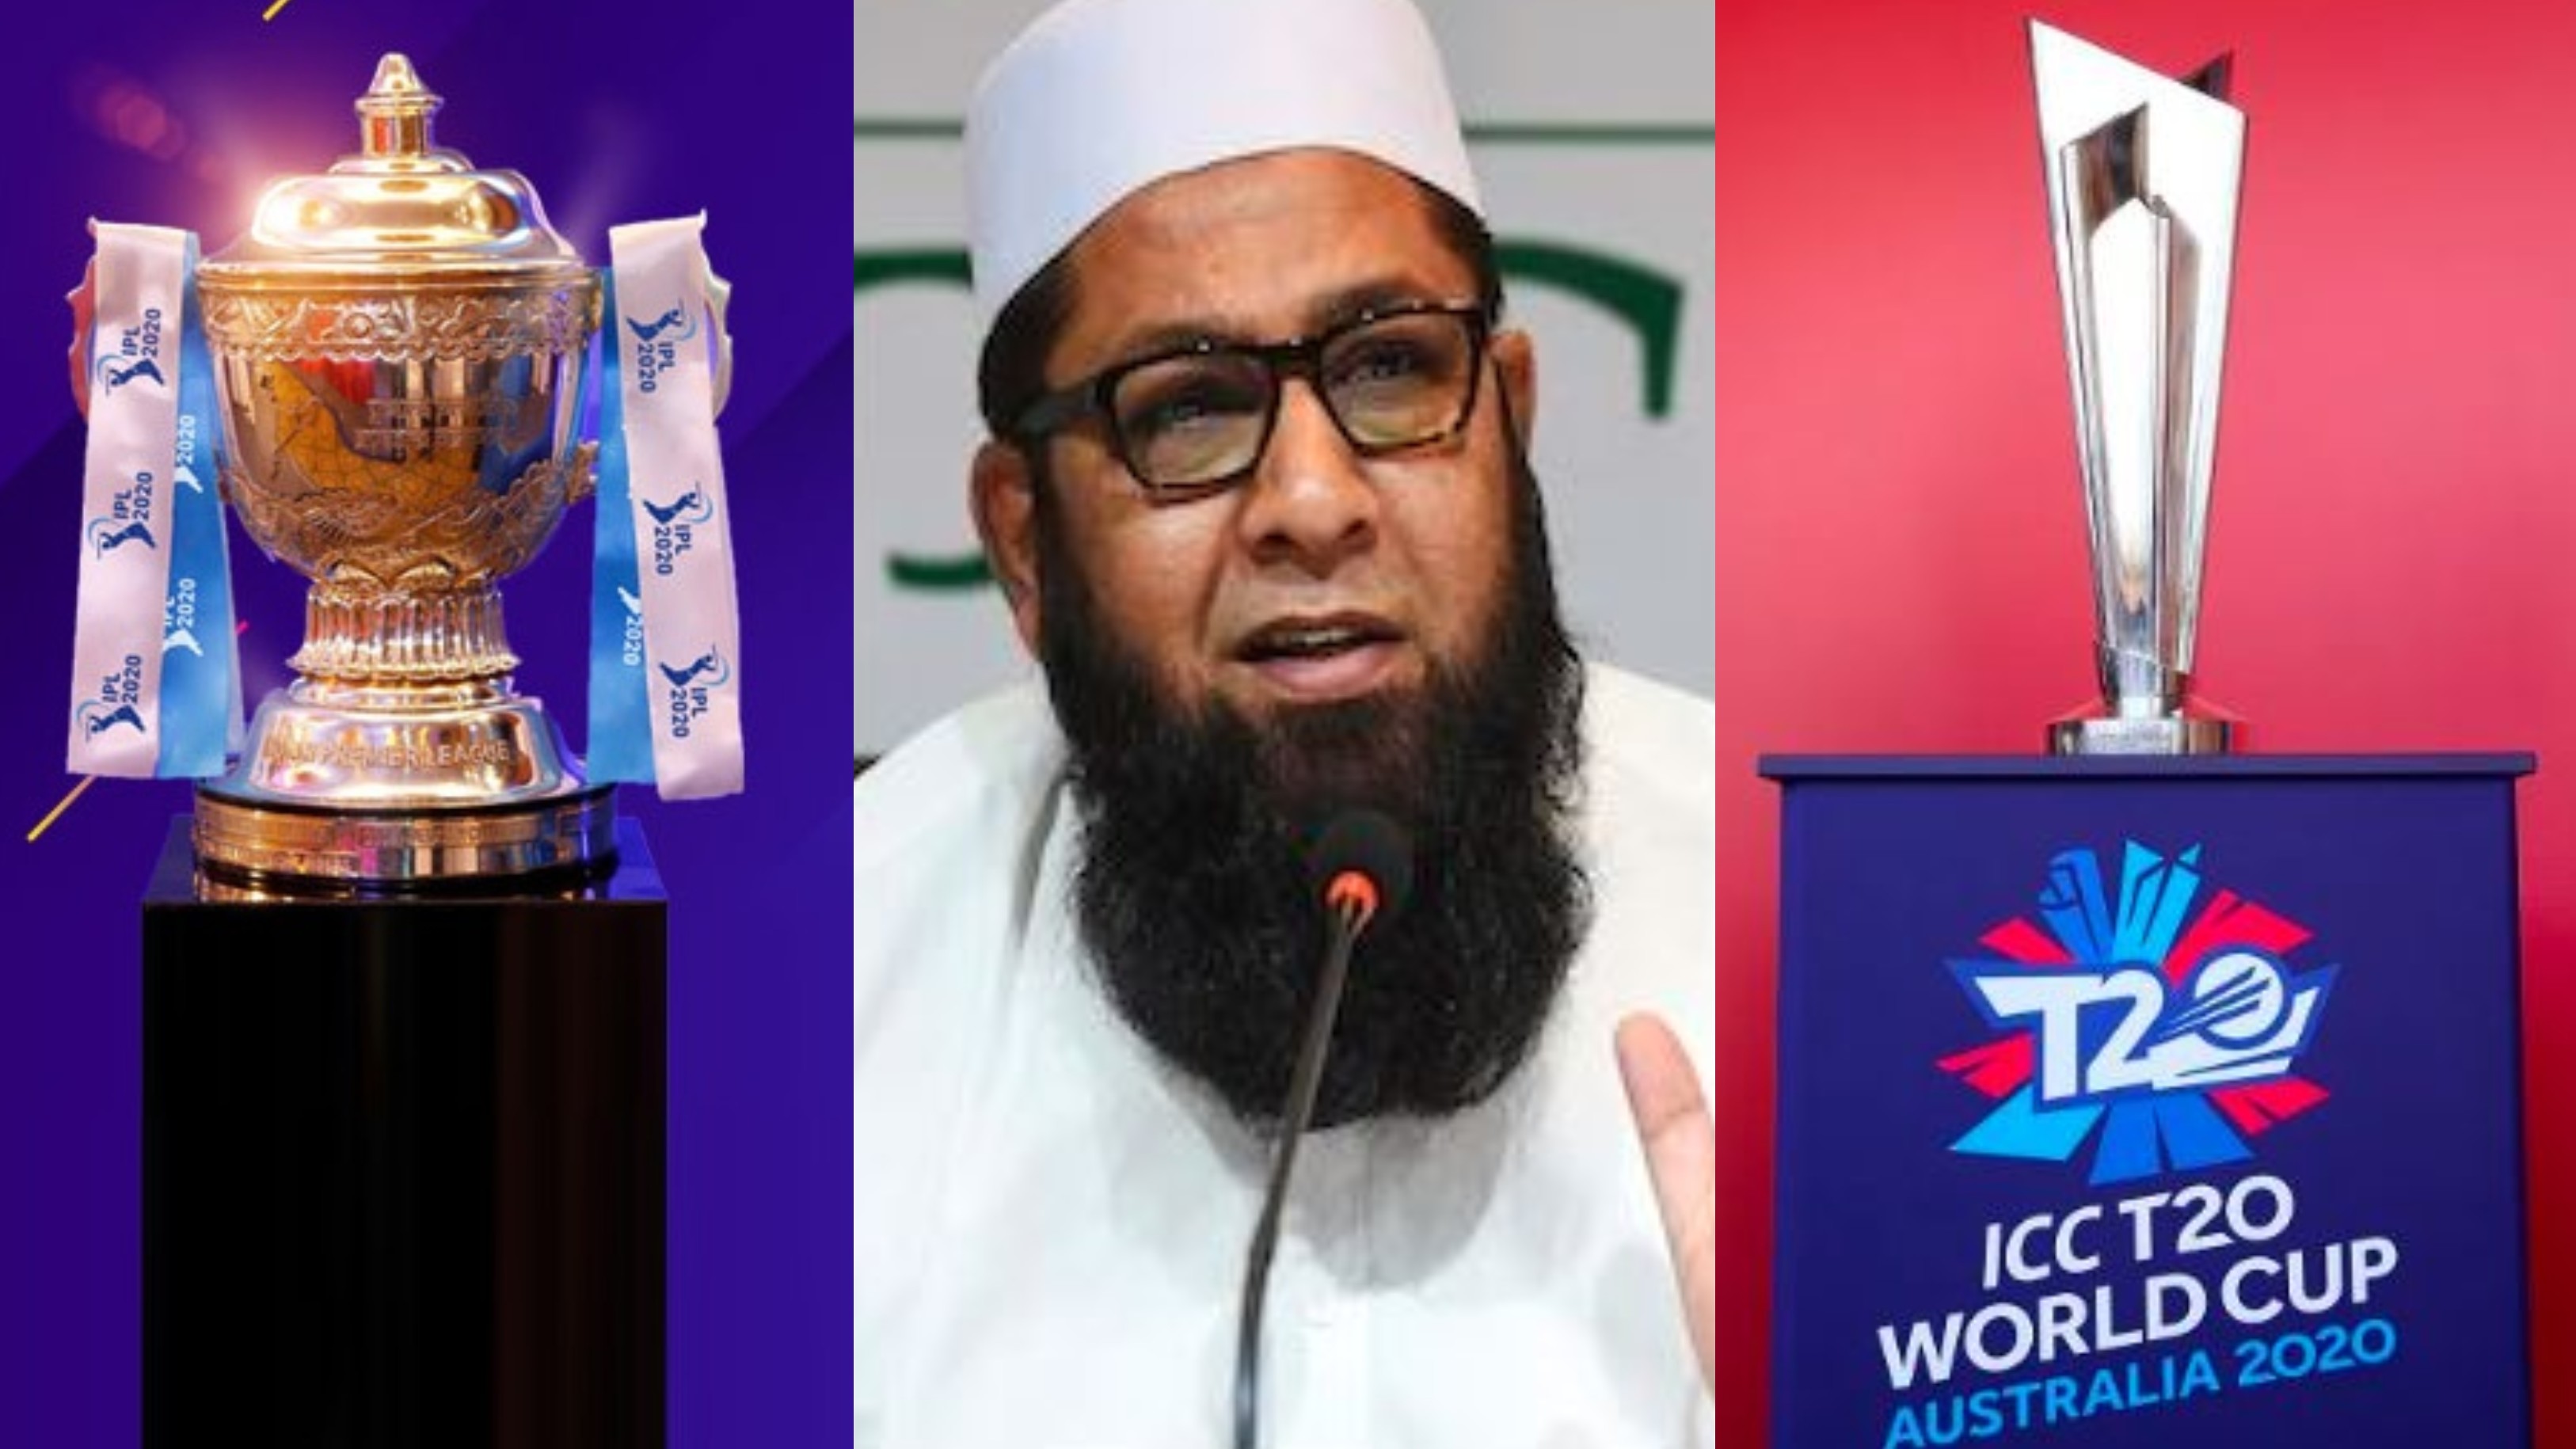 Questions will be raised if IPL 13 replaces T20 World Cup 2020, says Inzamam-Ul-Haq